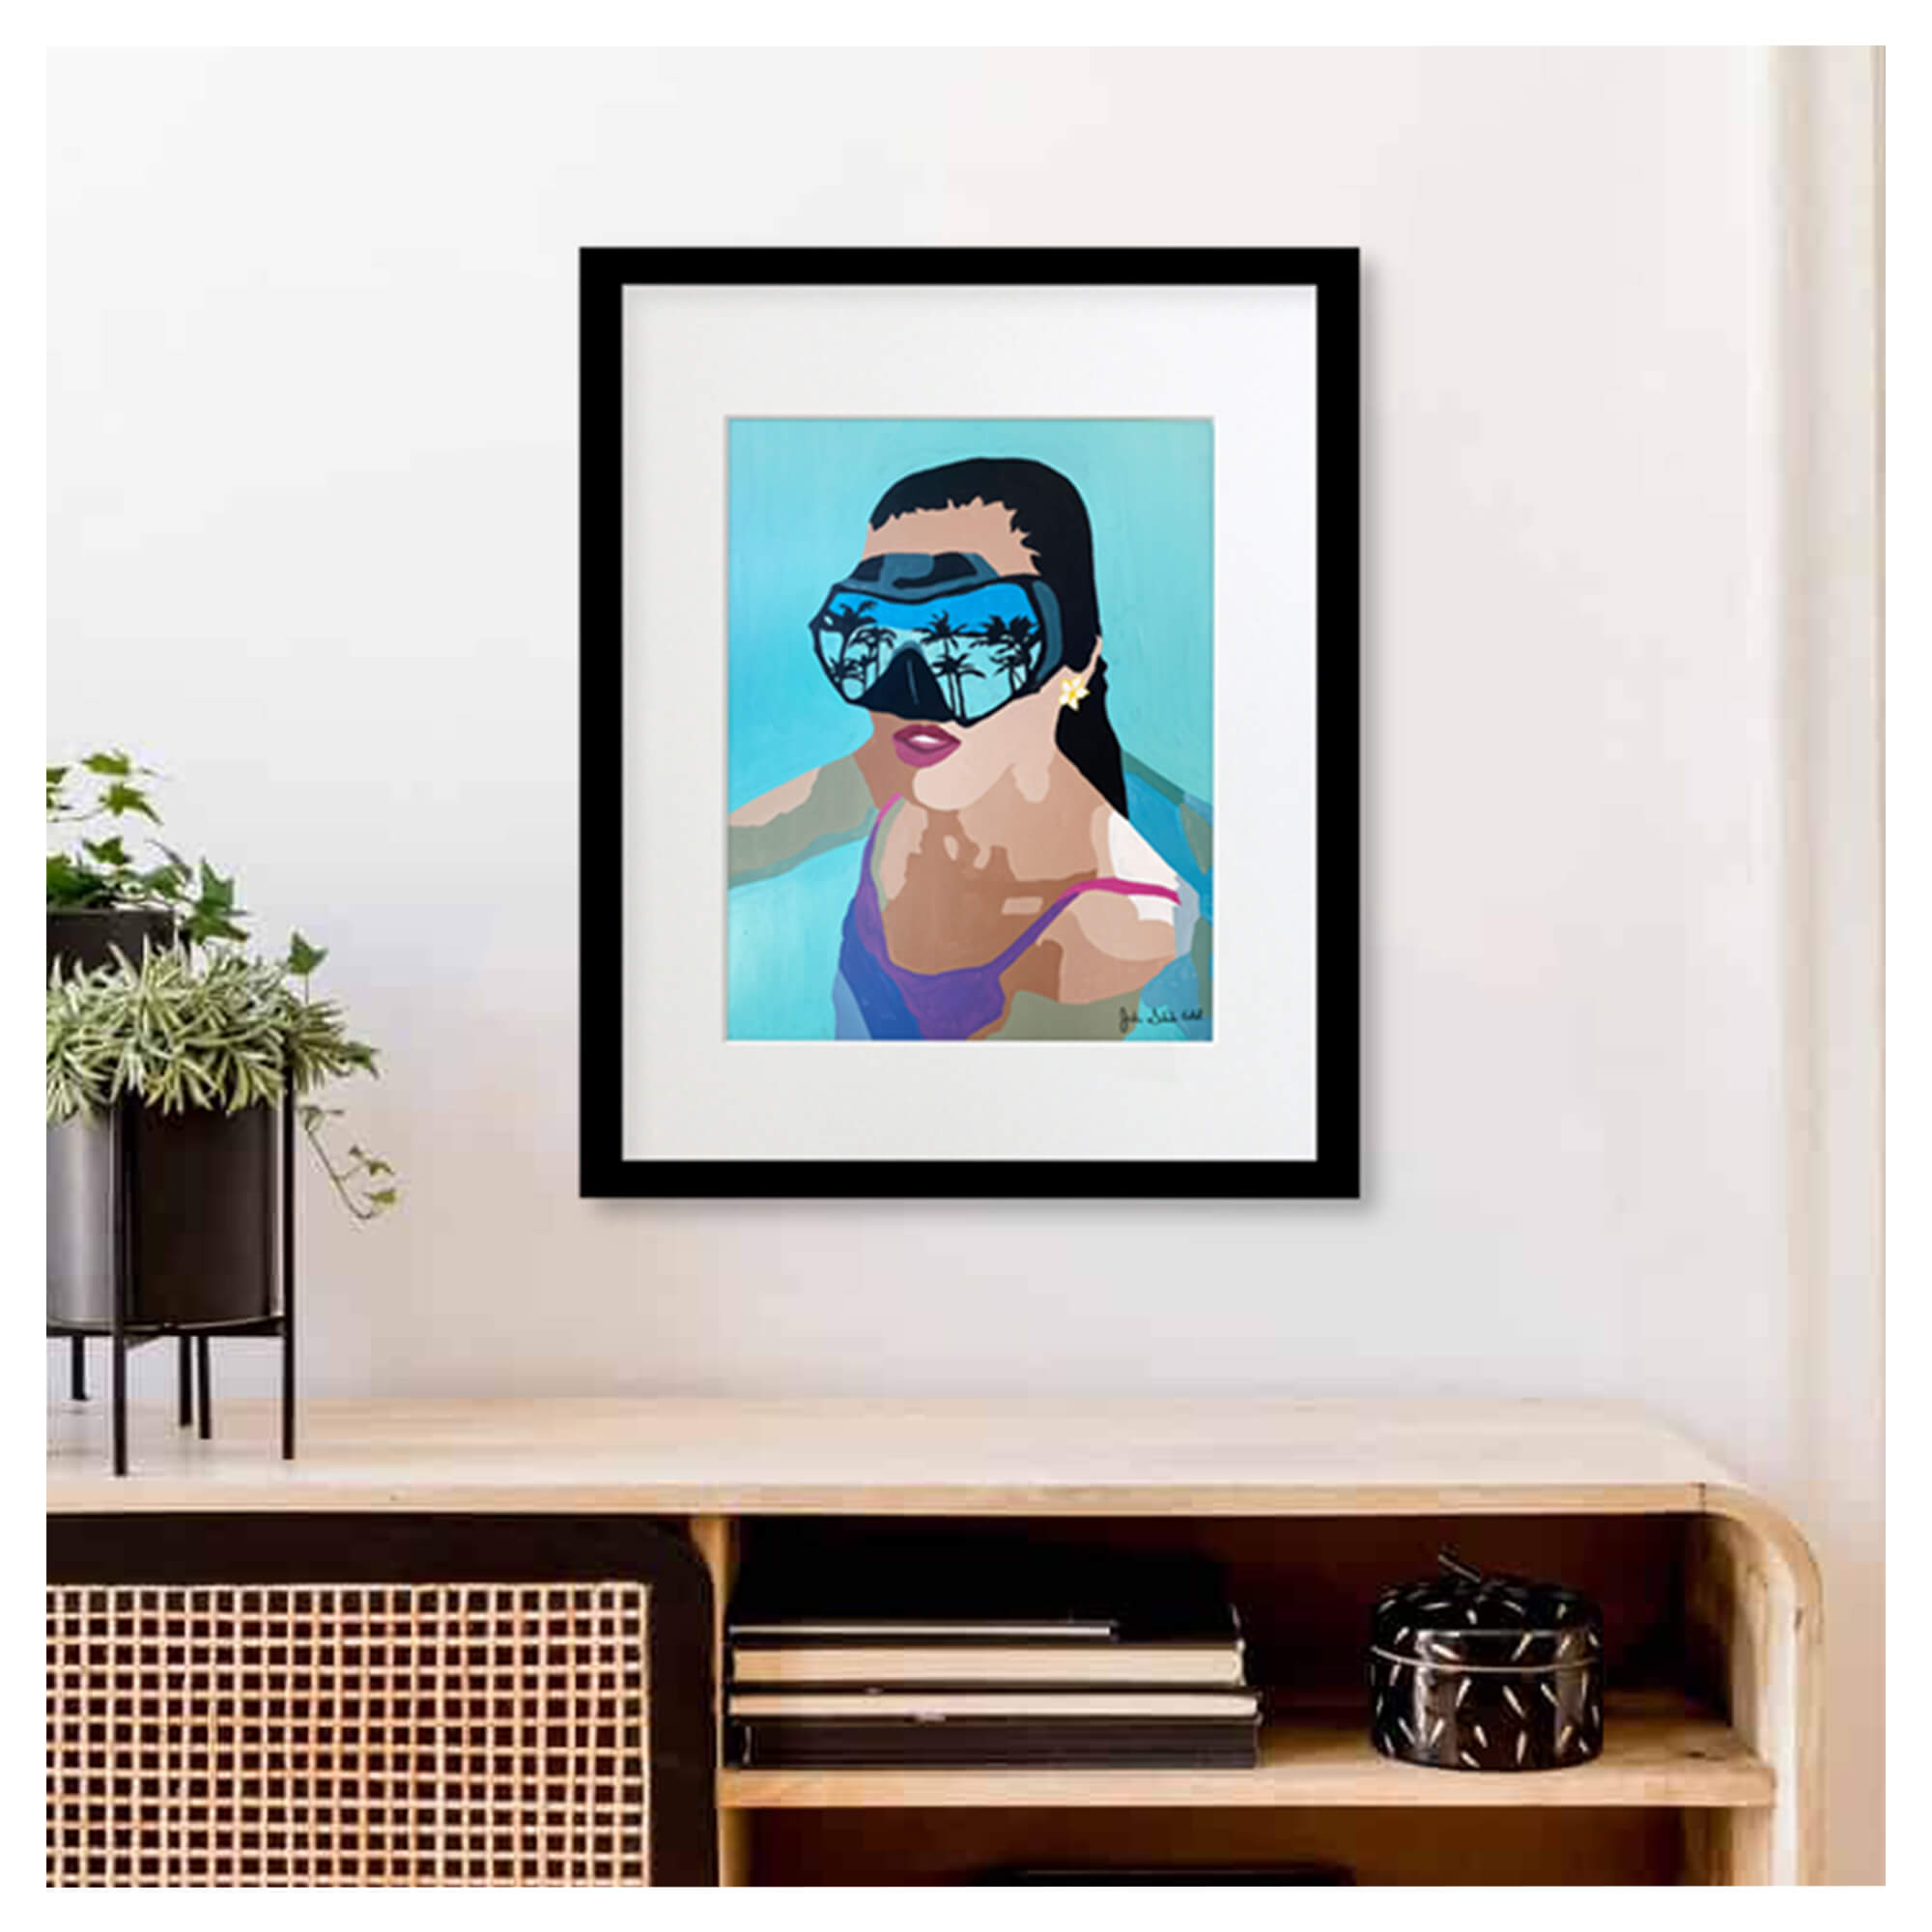 A framed matted art print featuring a portrait of a woman wearing goggles reflecting the tropical trees by Hawaii artist Jackie Eitel